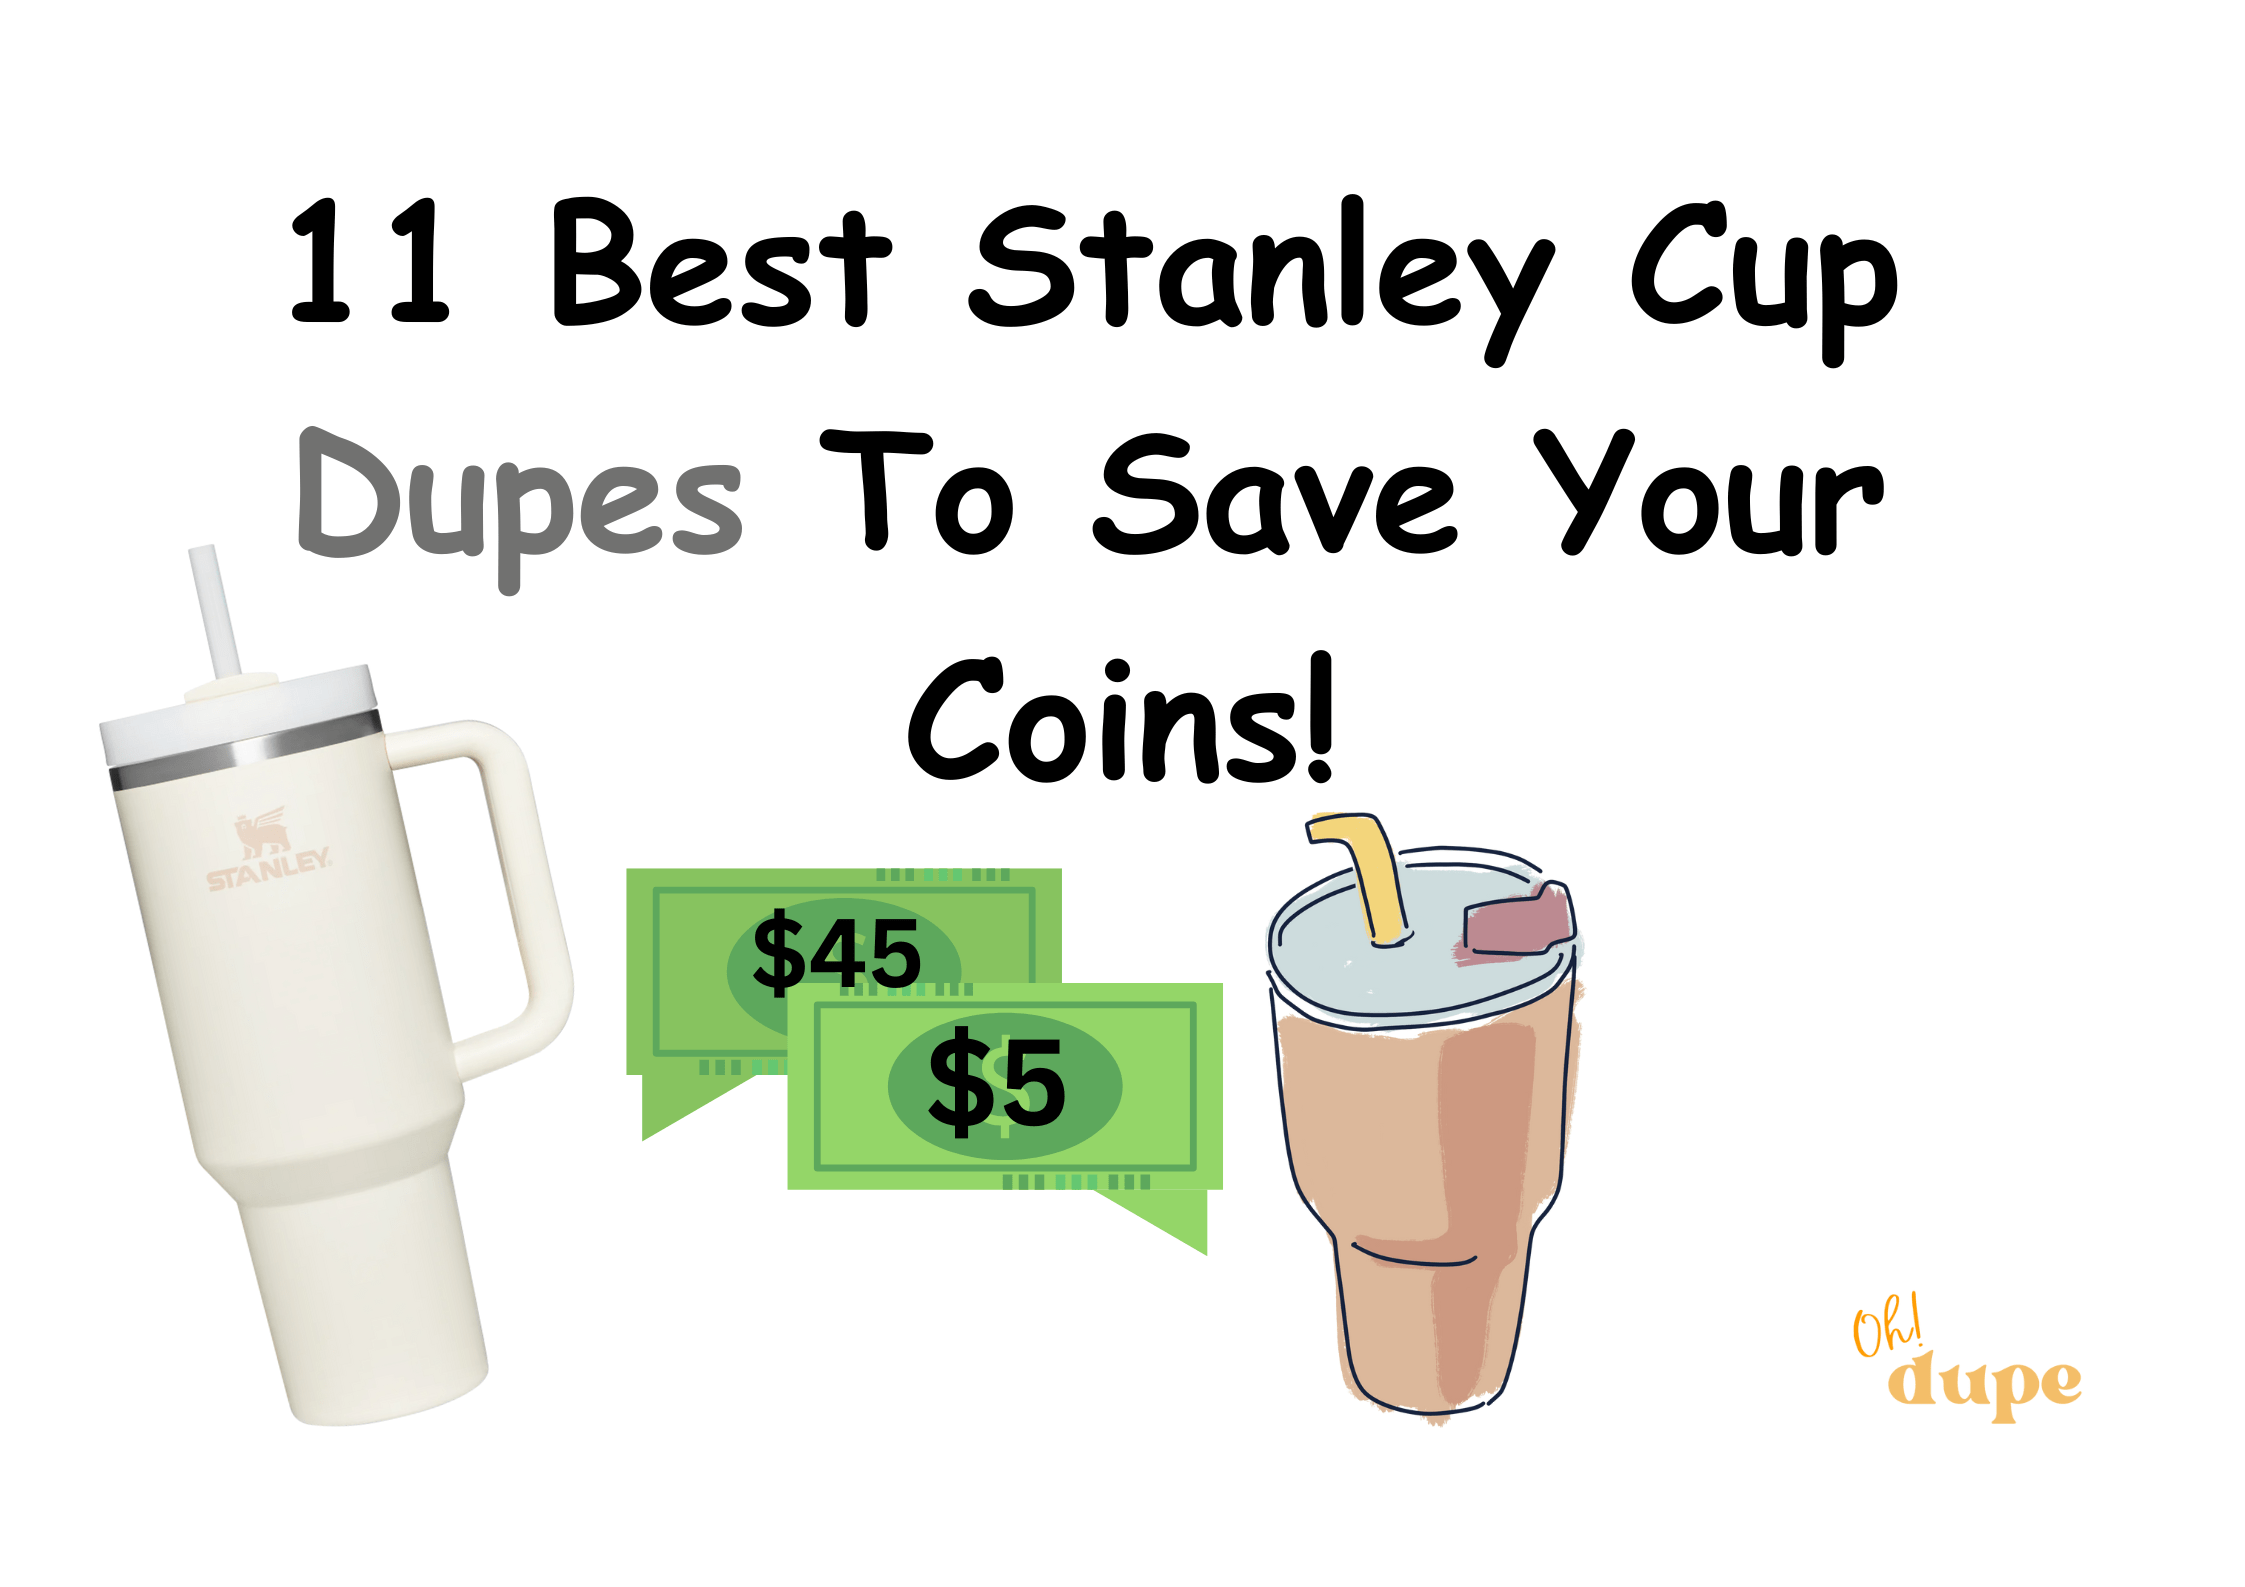 Stanley Cup Dupe